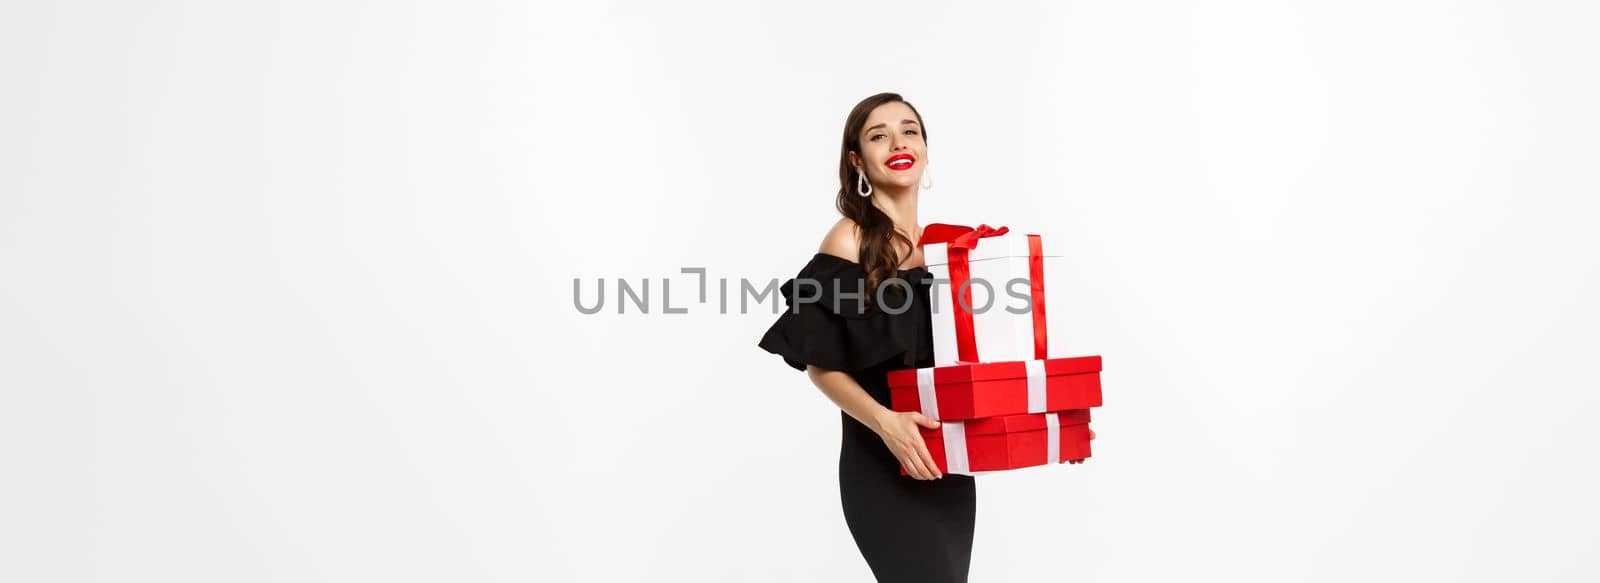 Full length of elegant woman in black dress, red lips, holding christmas presents and smiling pleased, receive gifts, standing over white background.